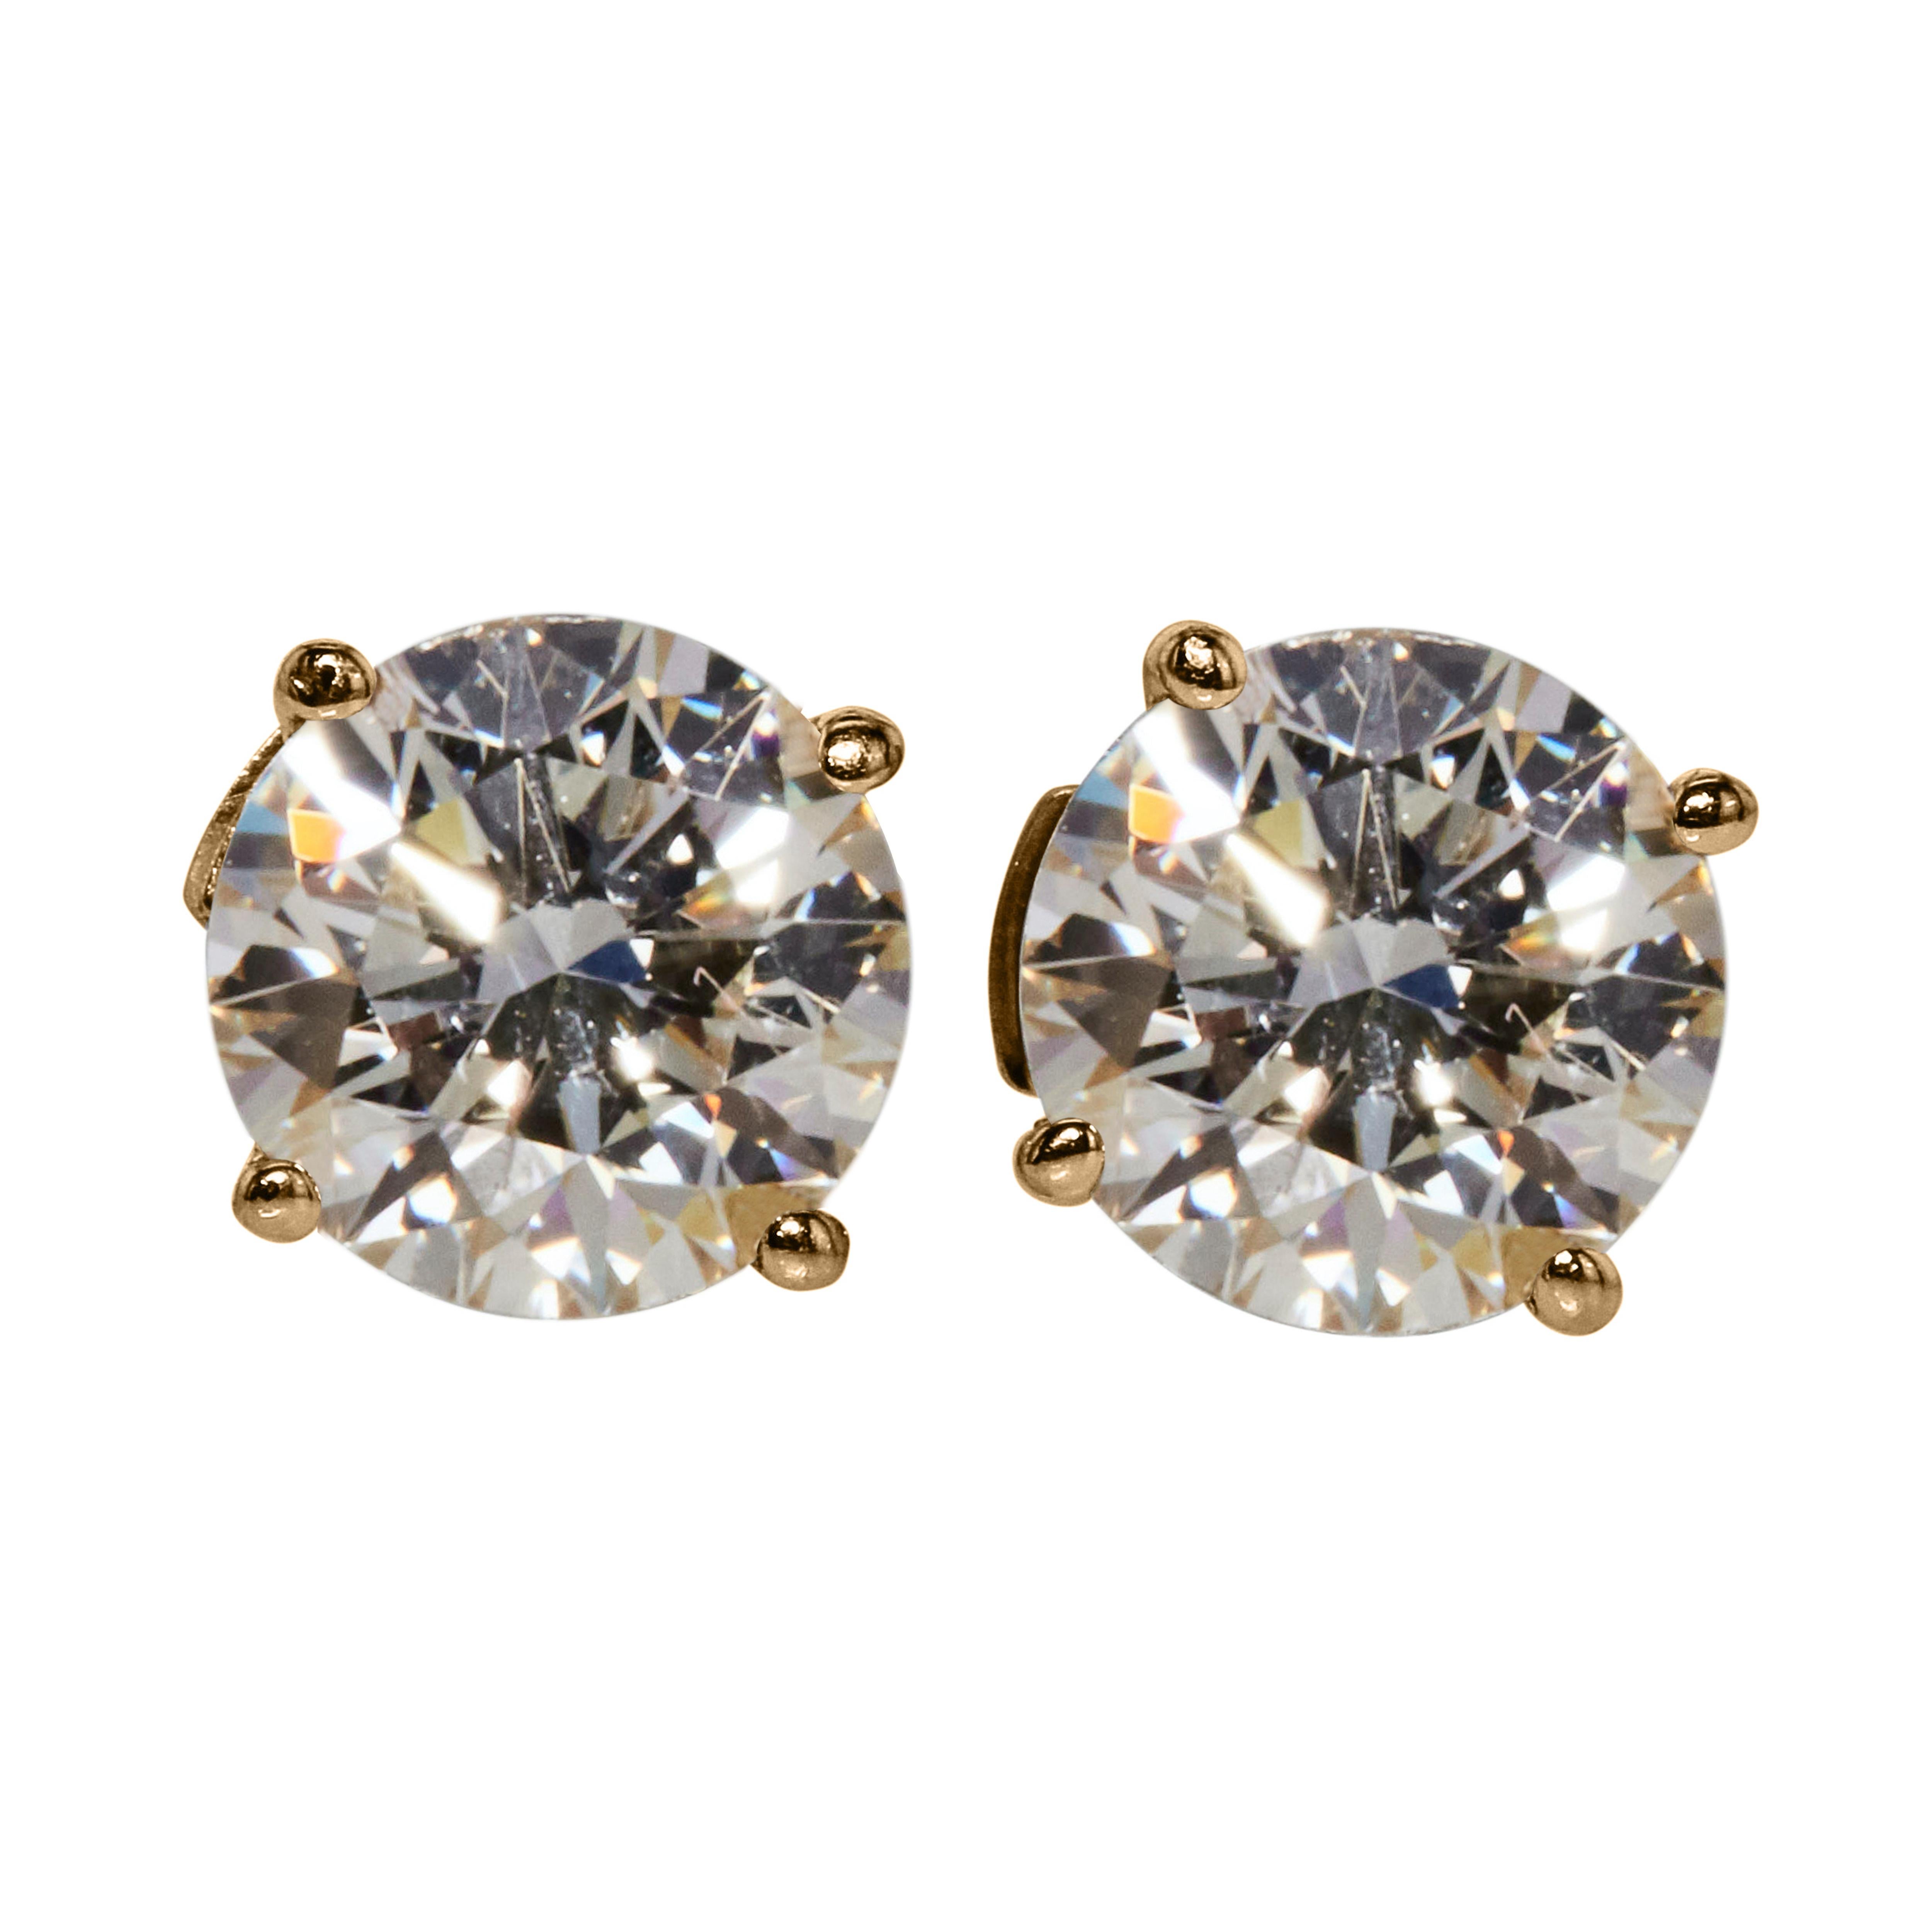 Classic over 1/2 Carat solitaire diamond stud earrings in 14k yellow gold. Pair of natural earth-mined round brilliant diamonds weighing approx. 0.70 carats are prong-set in these 14K basket studs.

Diamond stud earrings come with a fine velvet